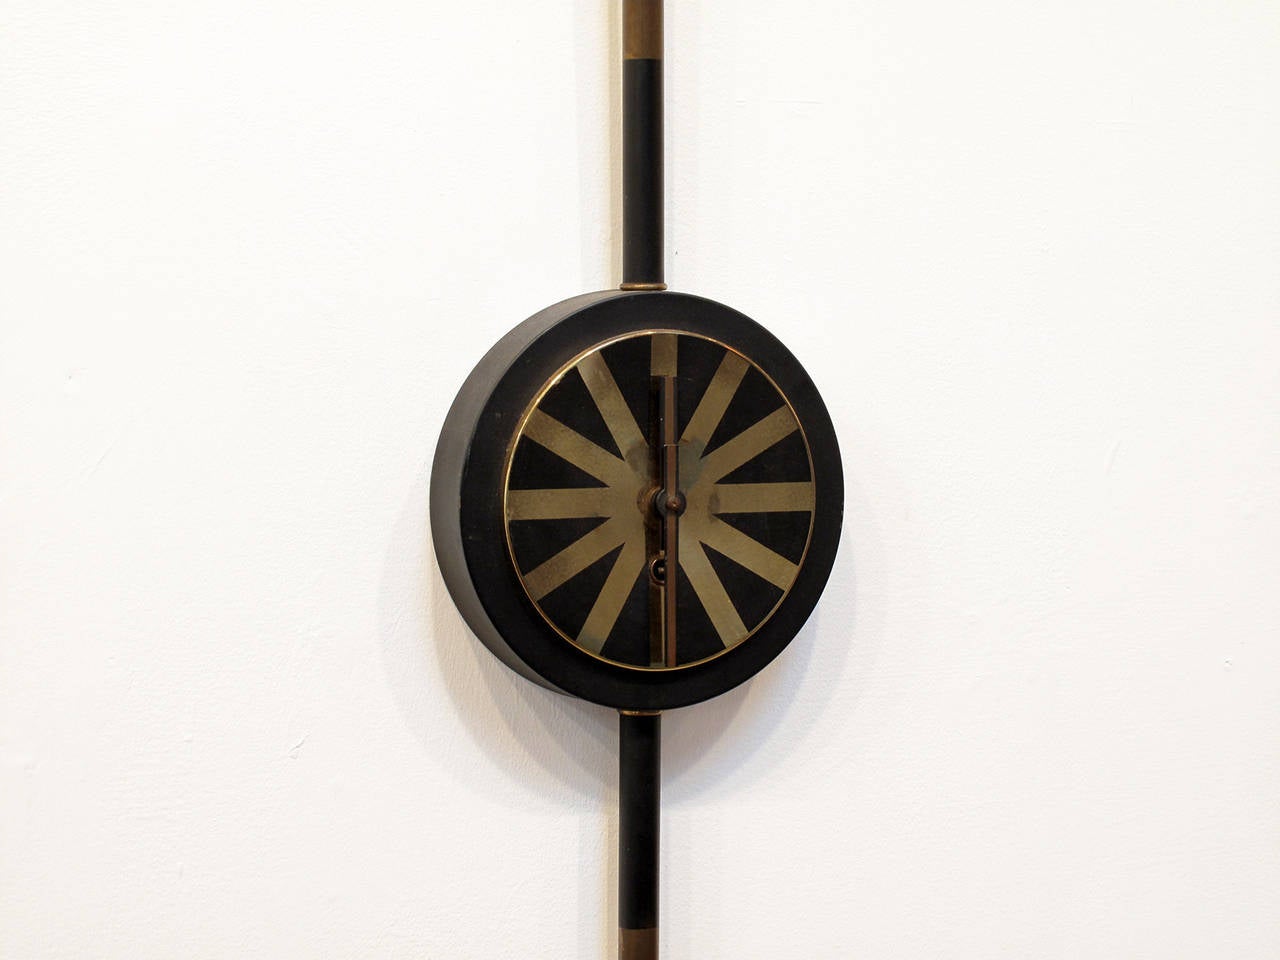 Mid-Century Modern Modernist Wall Clock Made in Germany, 1957 For Sale